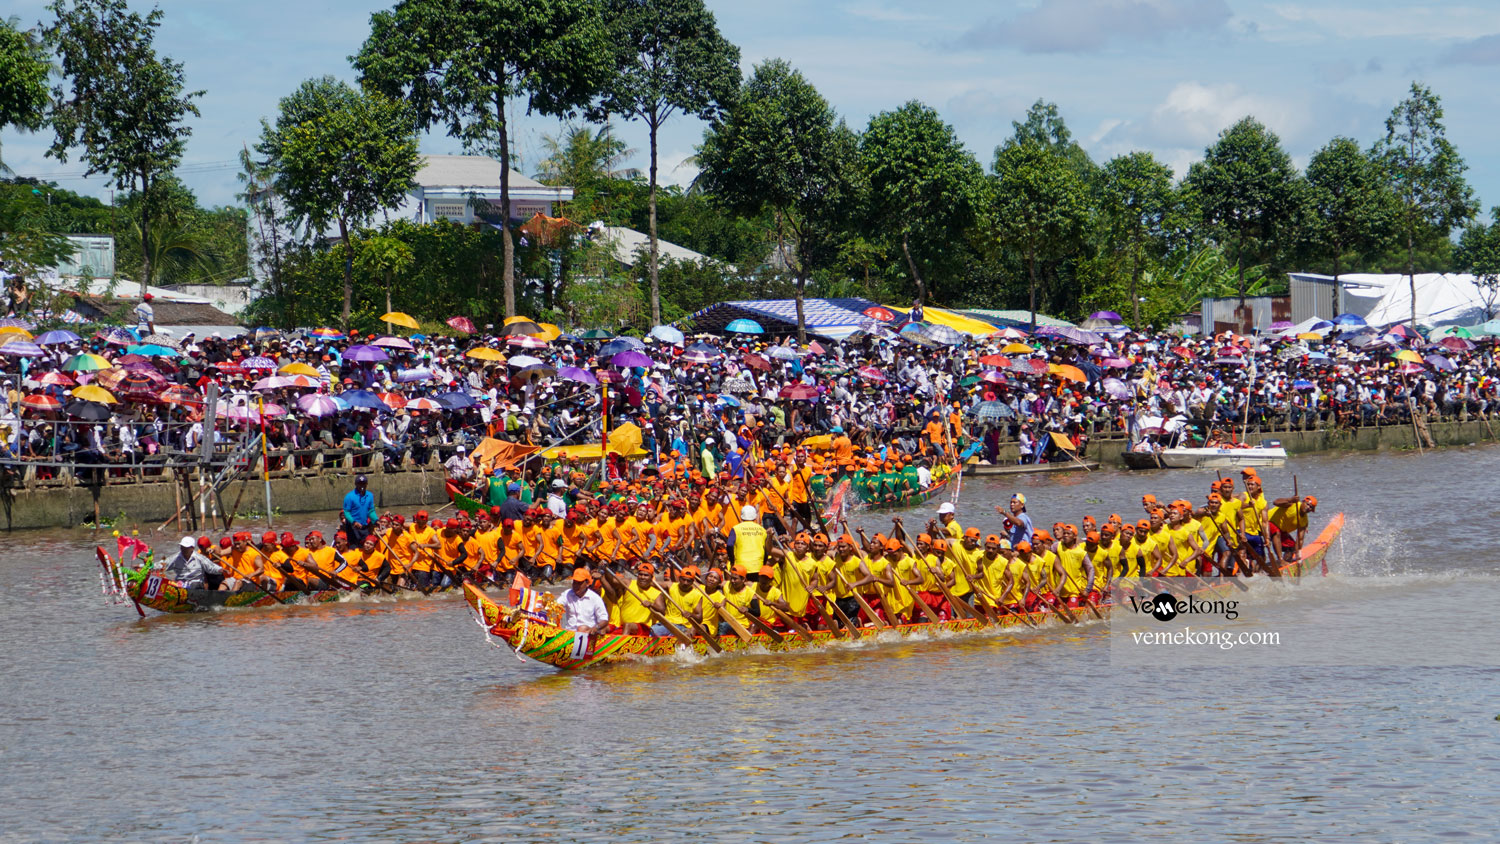 Ghe Ngo Boat Race Festival – A Must-See Soc Trang Festival